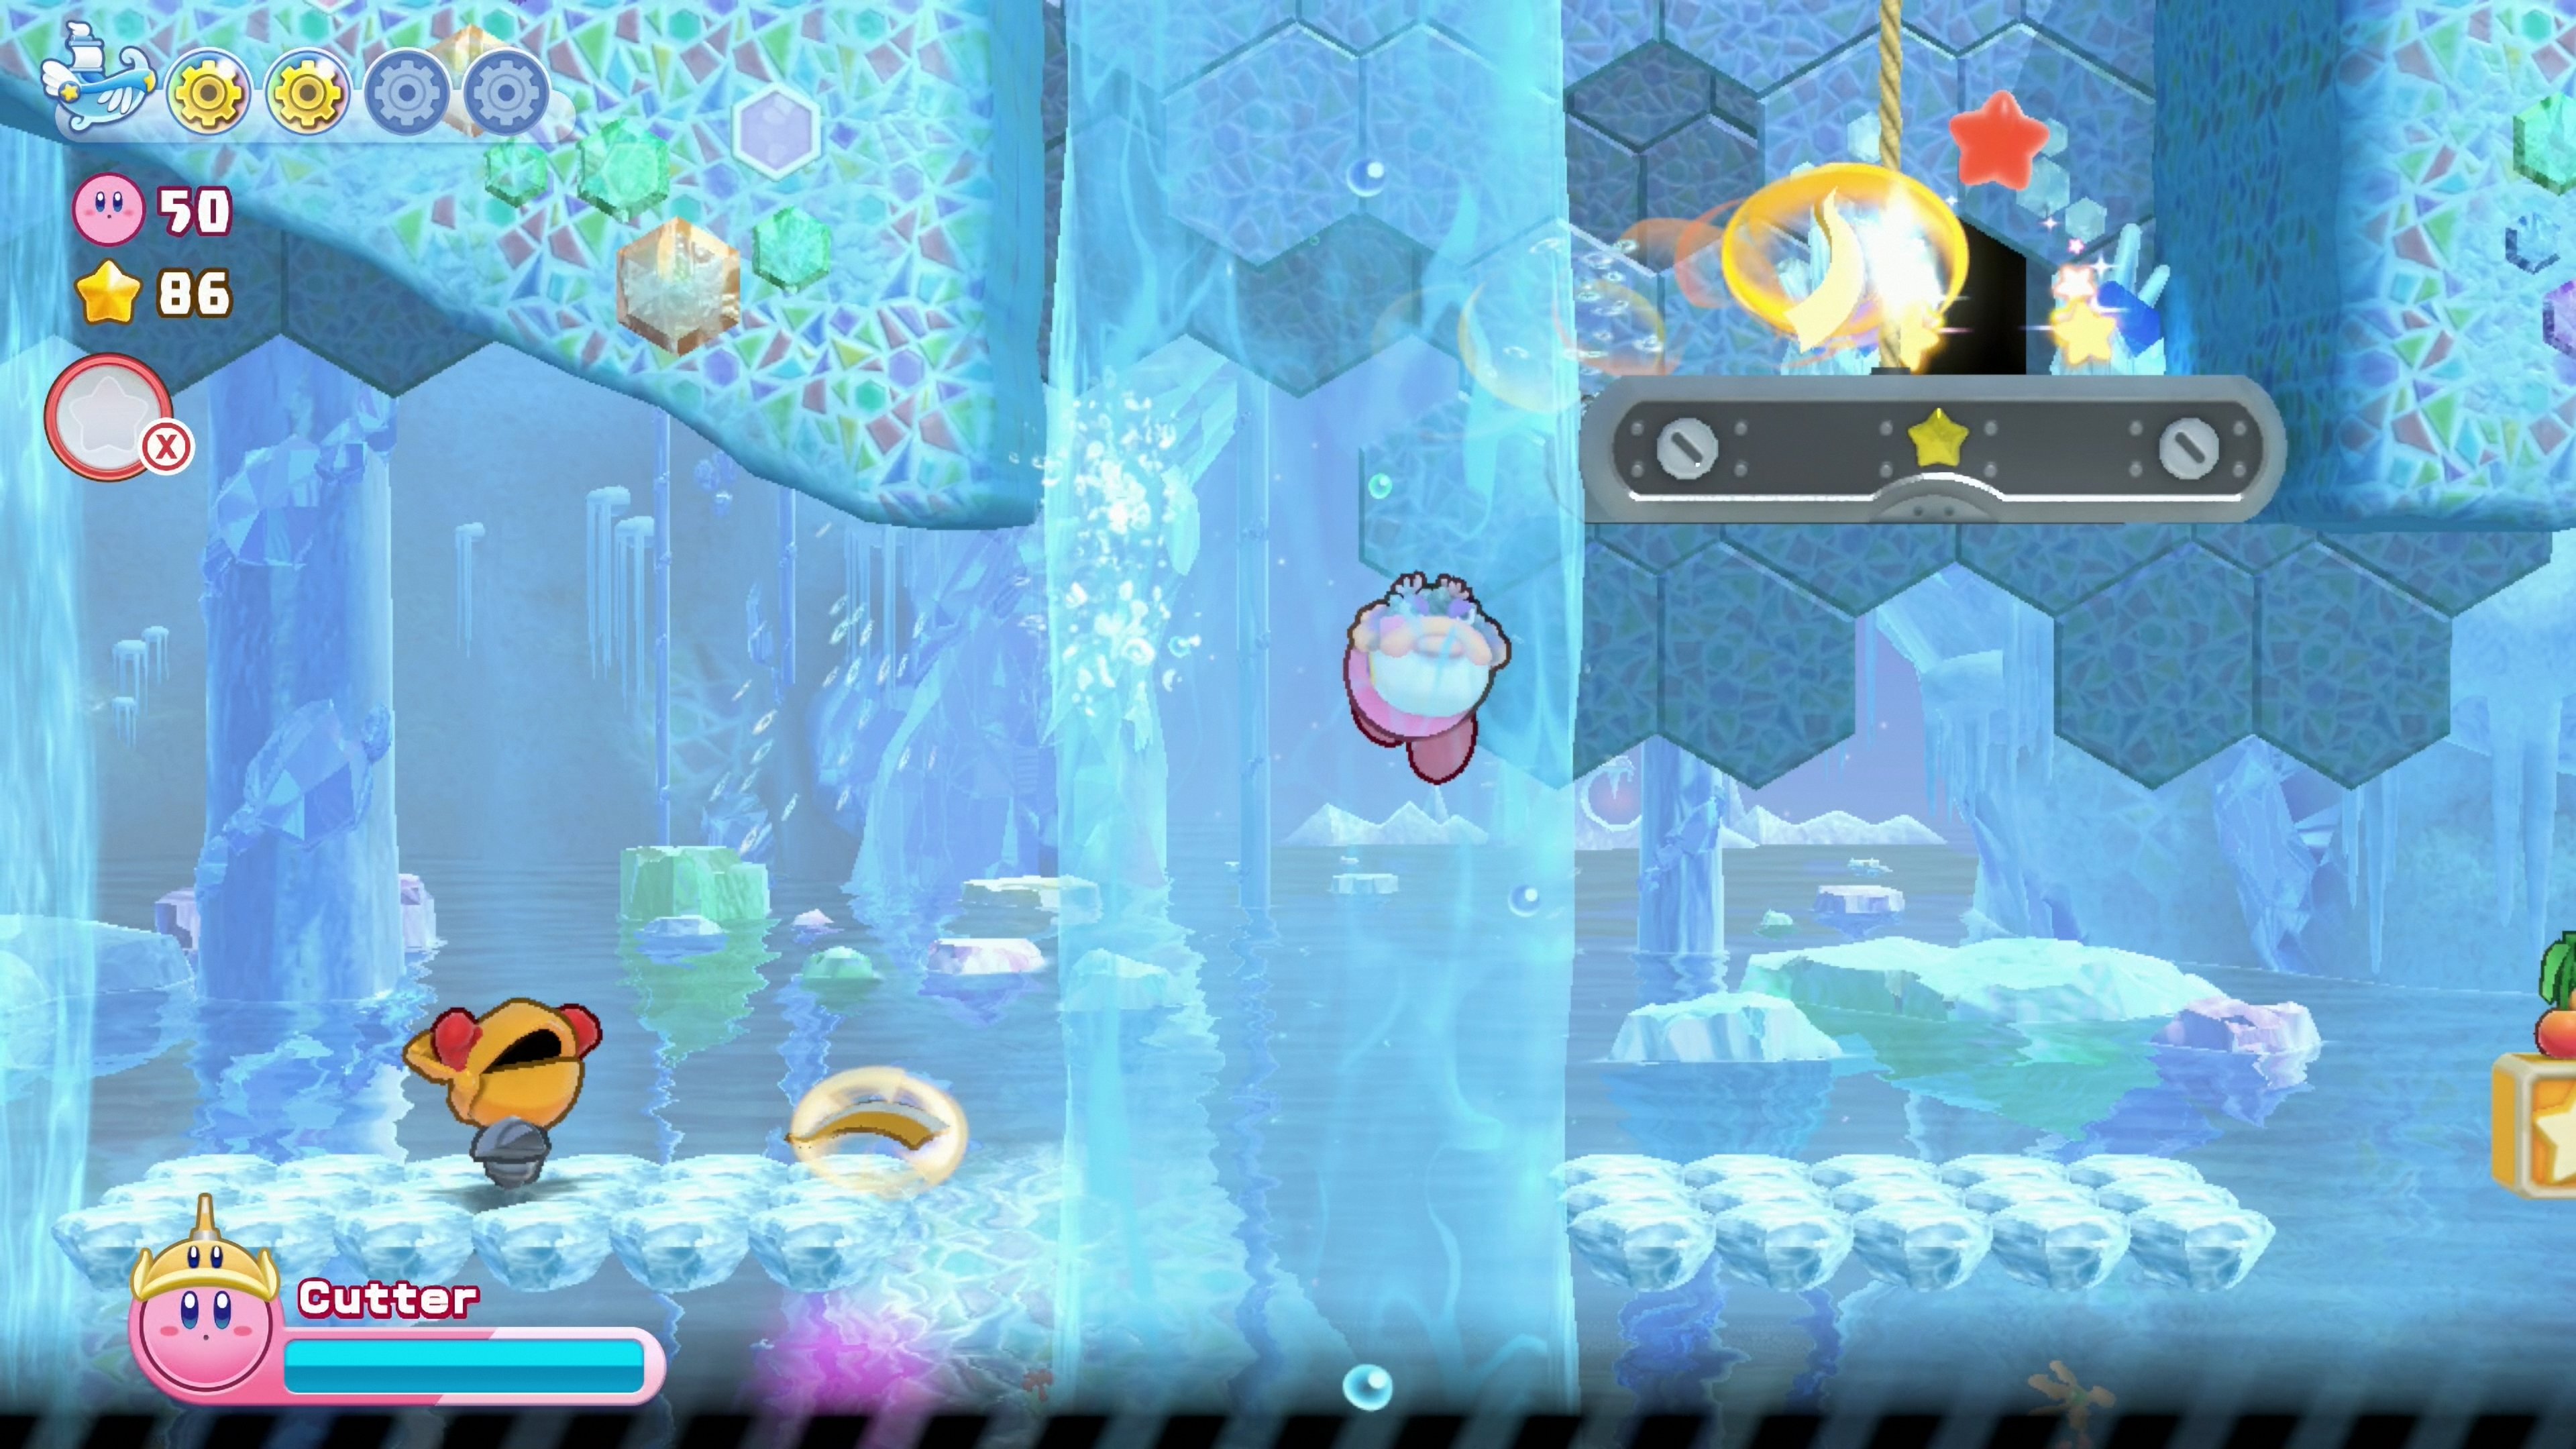 Kirby's Return to Dream Land Deluxe Energy Spheres: Level 3 Onion Ocean  locations